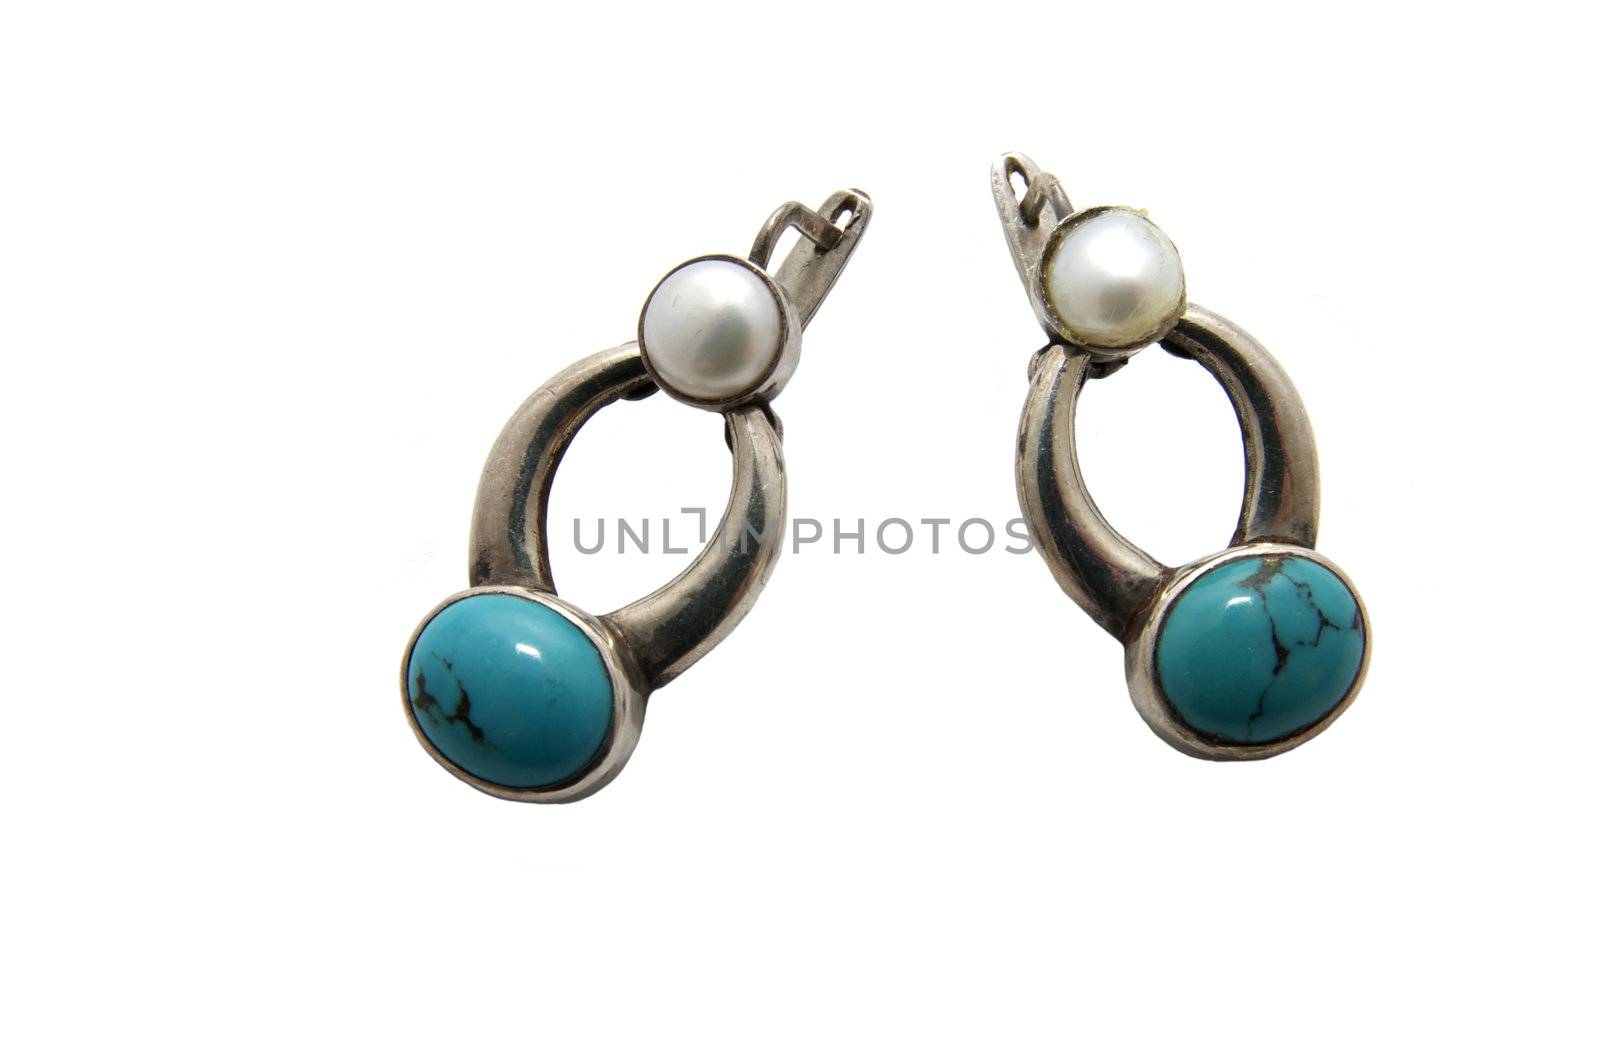 rings of precious metal with turquoise on a white background